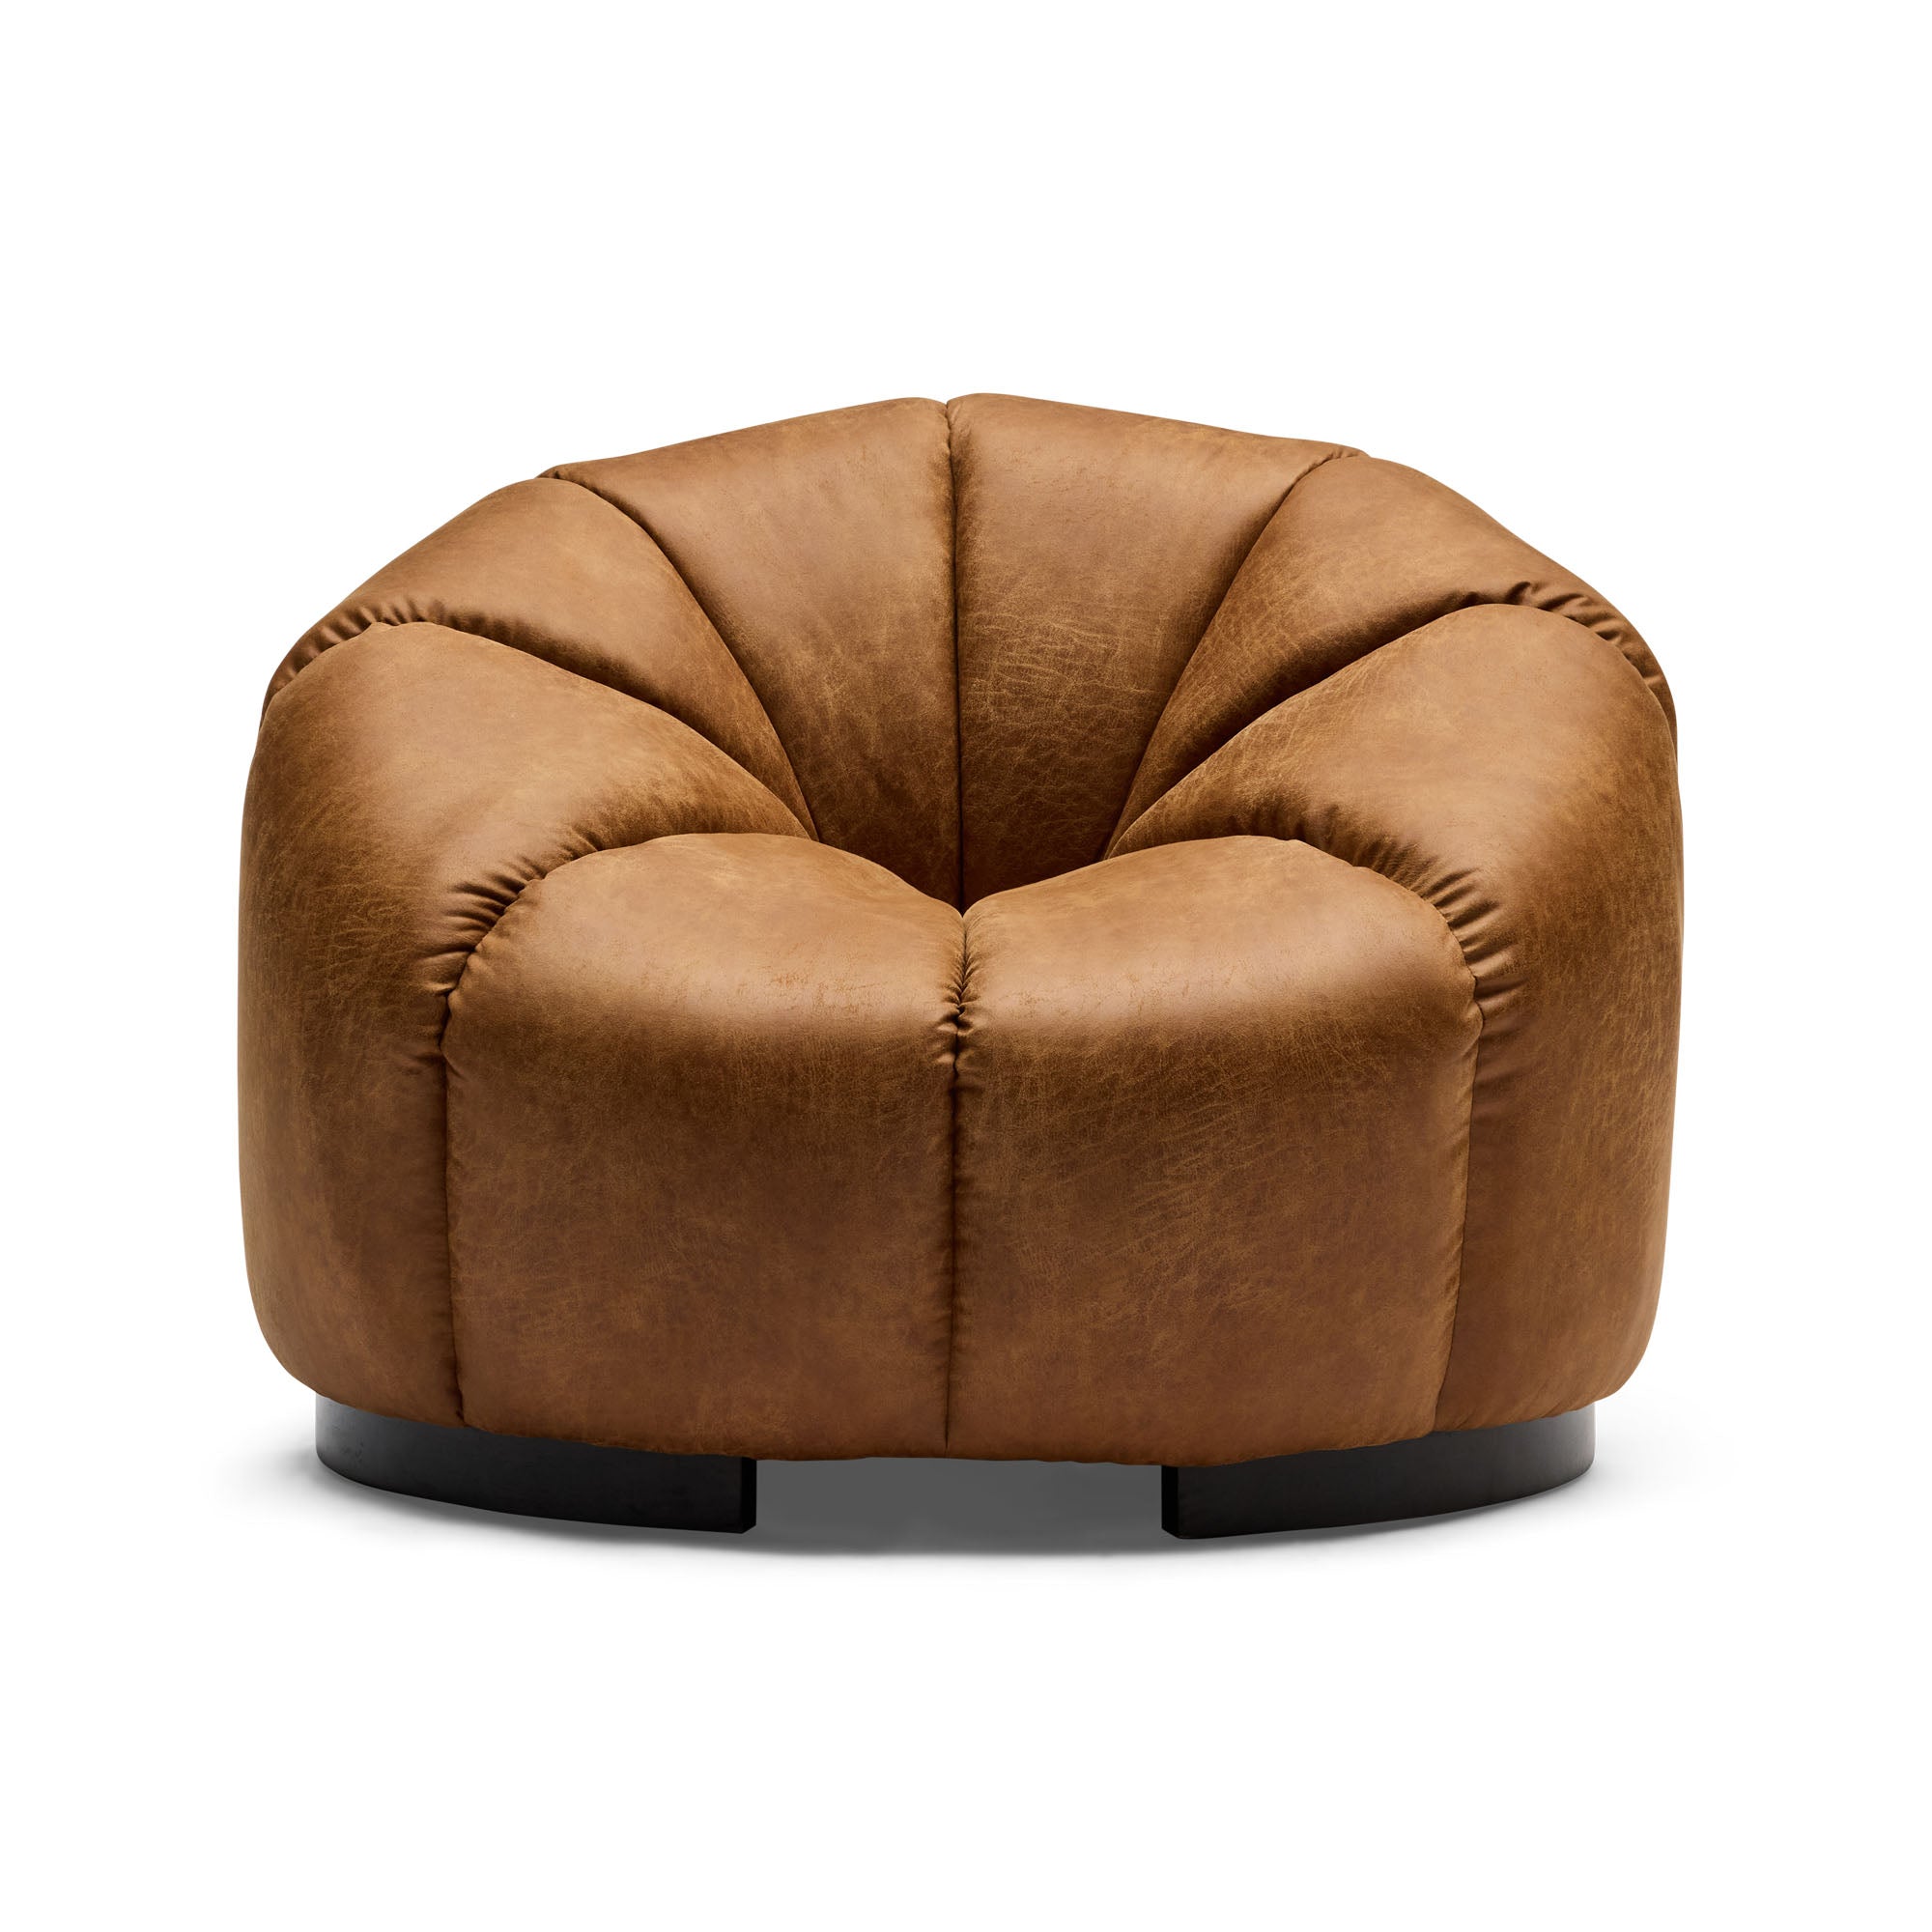 Modena Occasional Chair Cognac Leather Sample